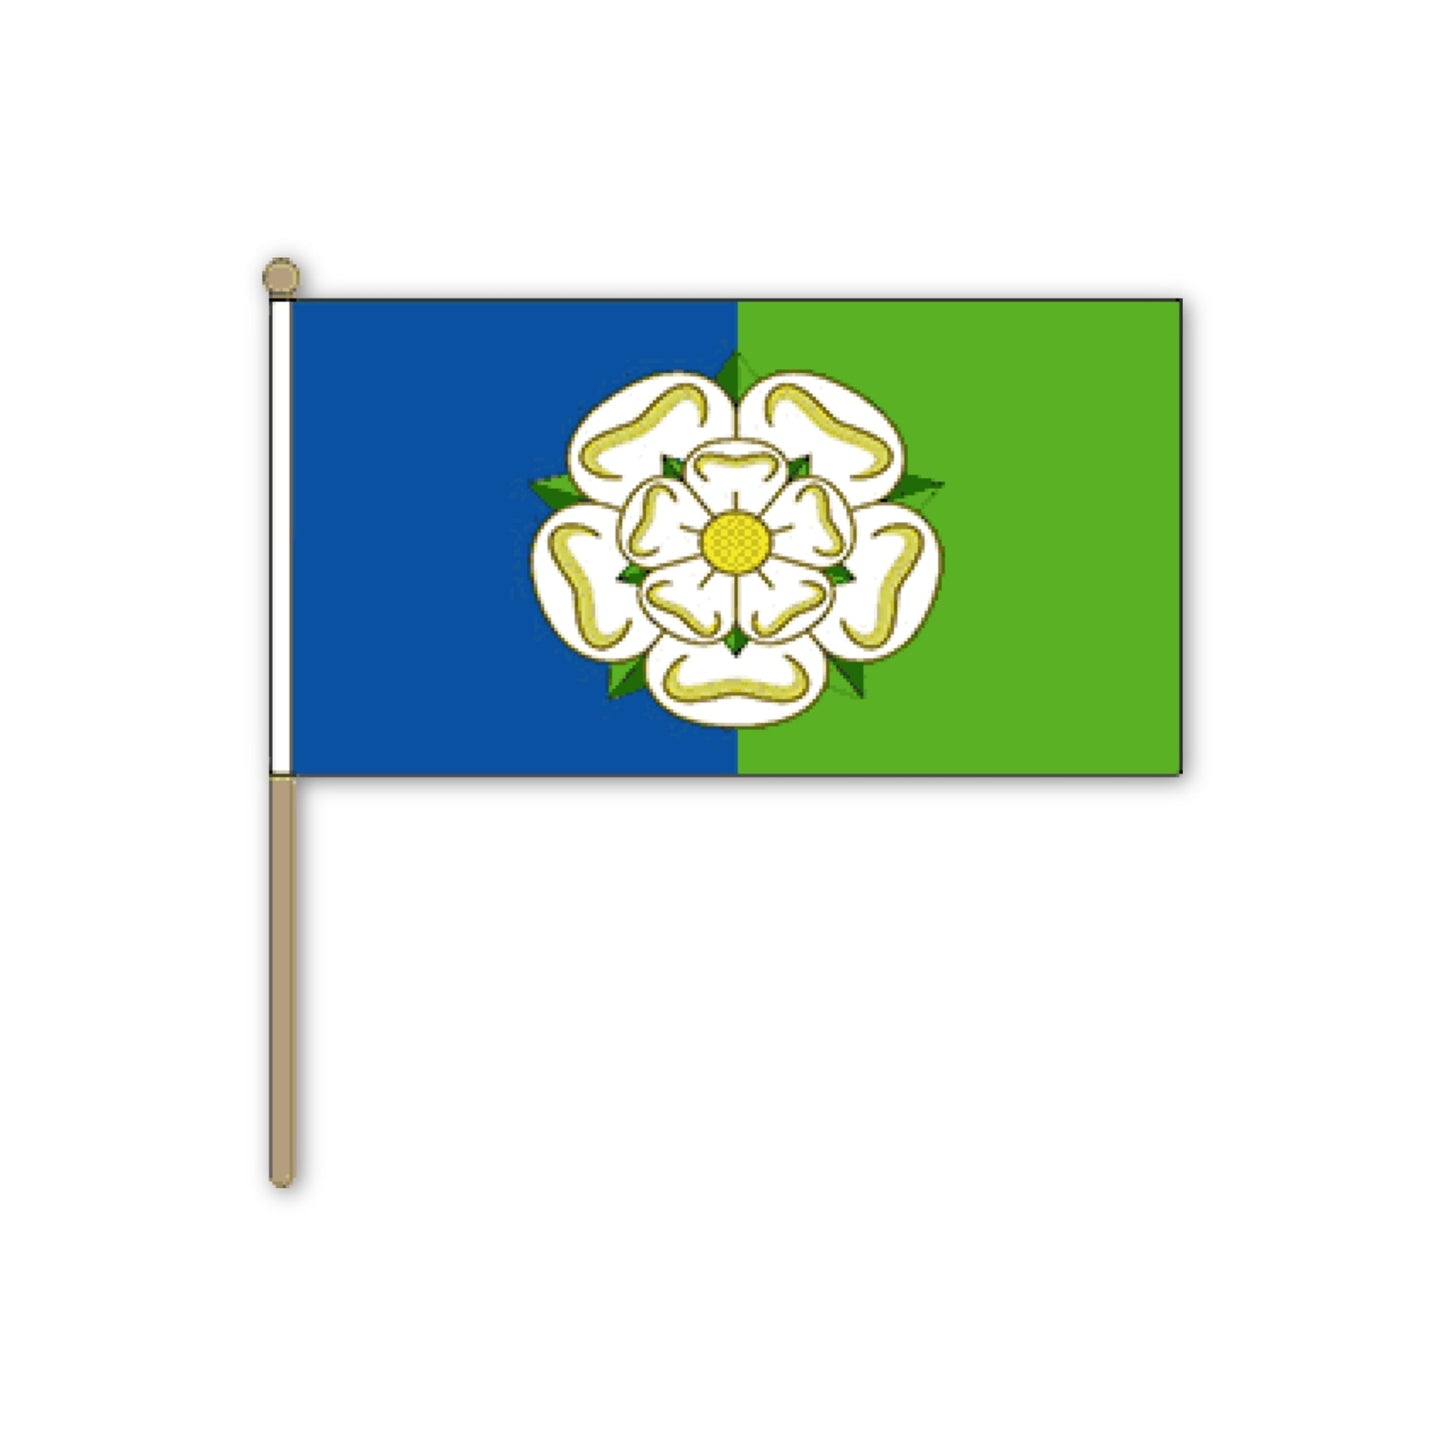 Hand Waving East Riding of Yorkshire Flag - The Great Yorkshire Shop